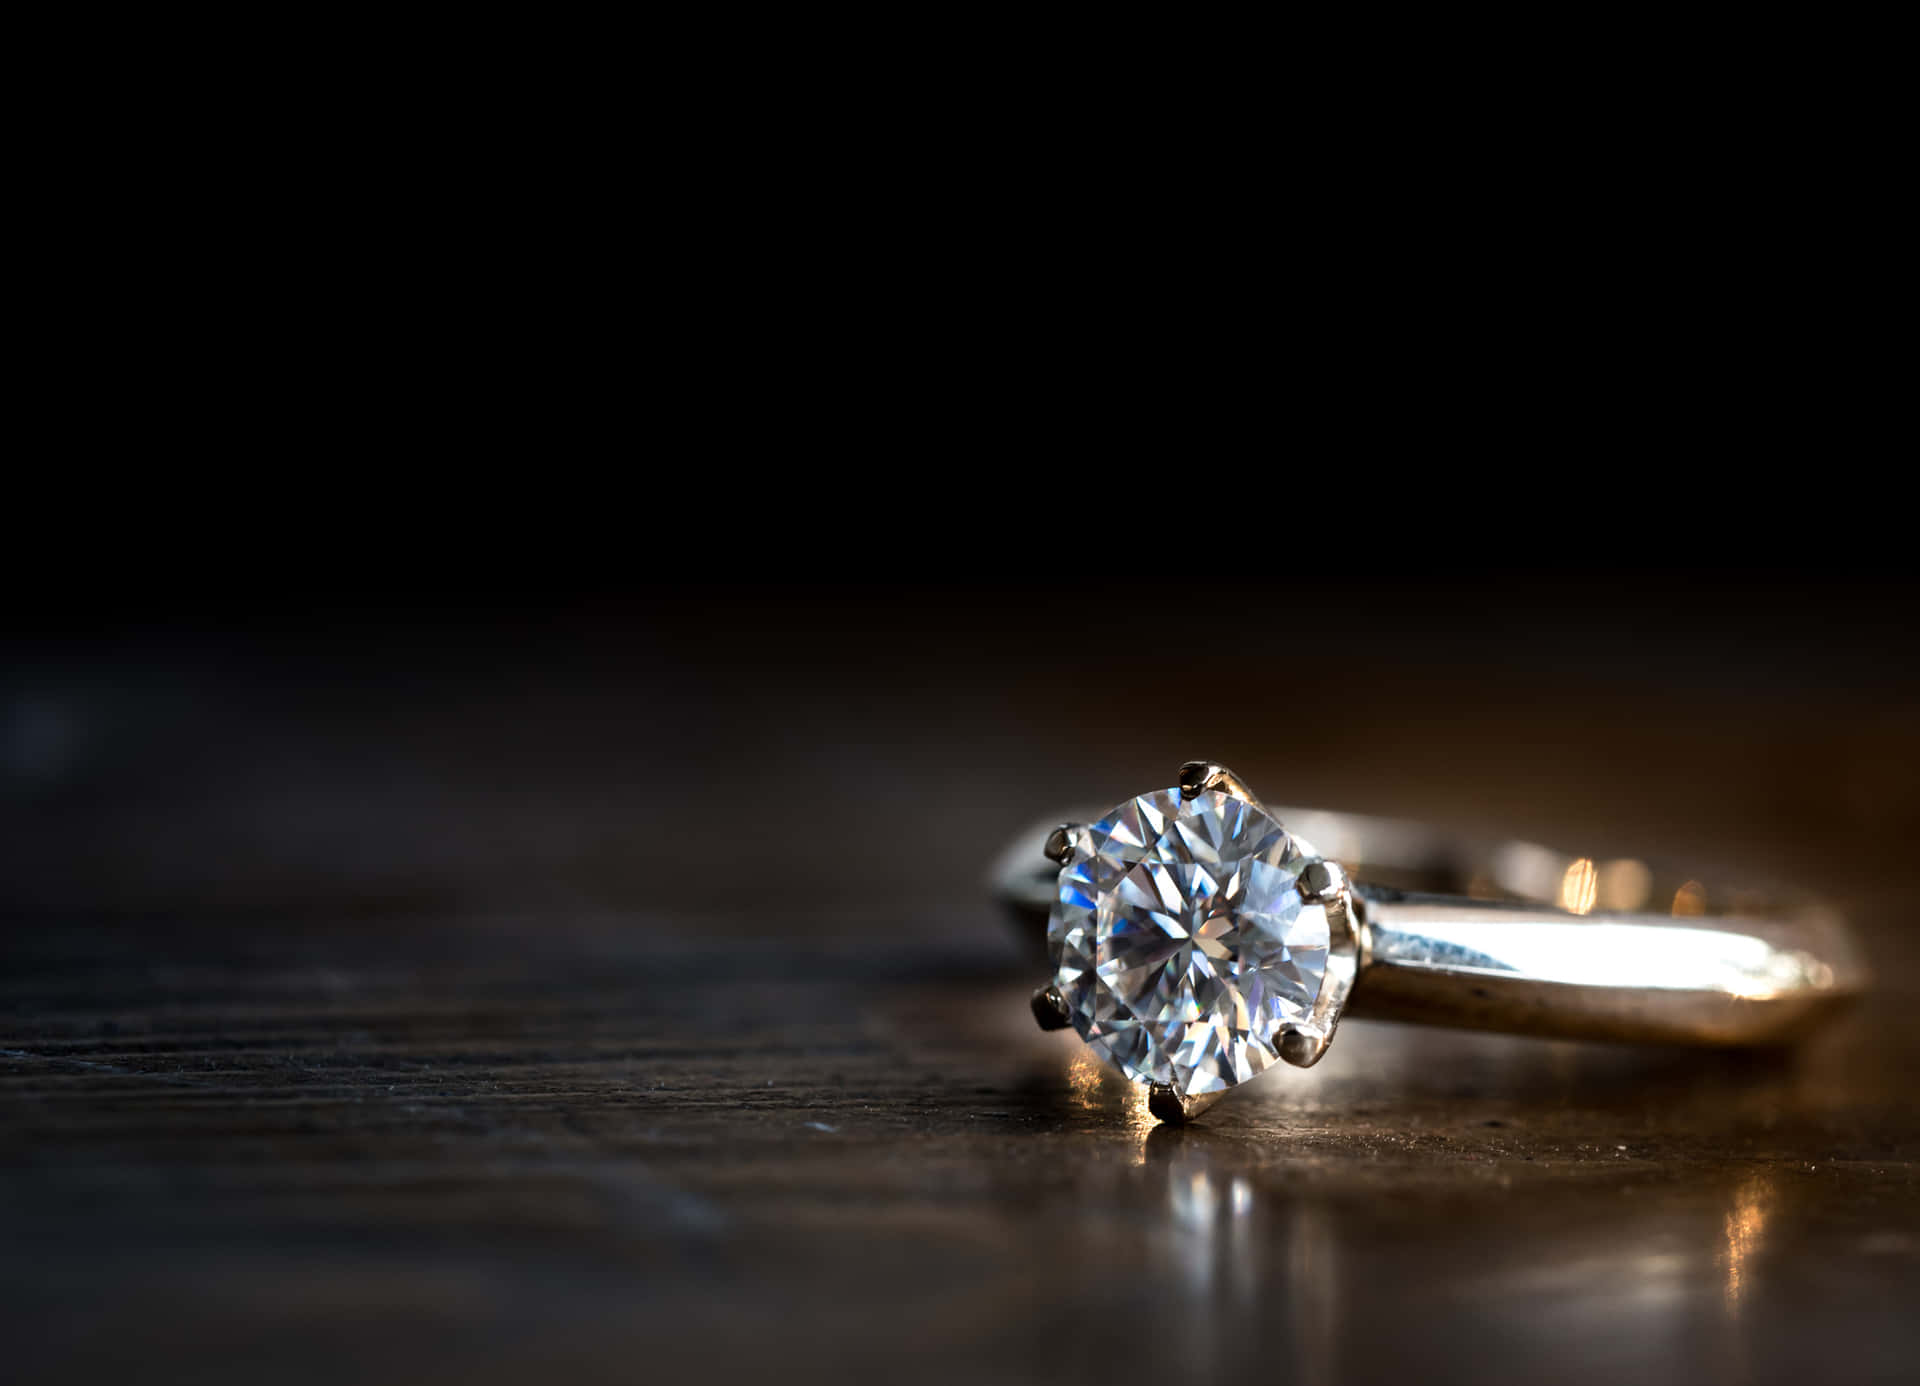 How to clean a diamond ring at home | Times of India